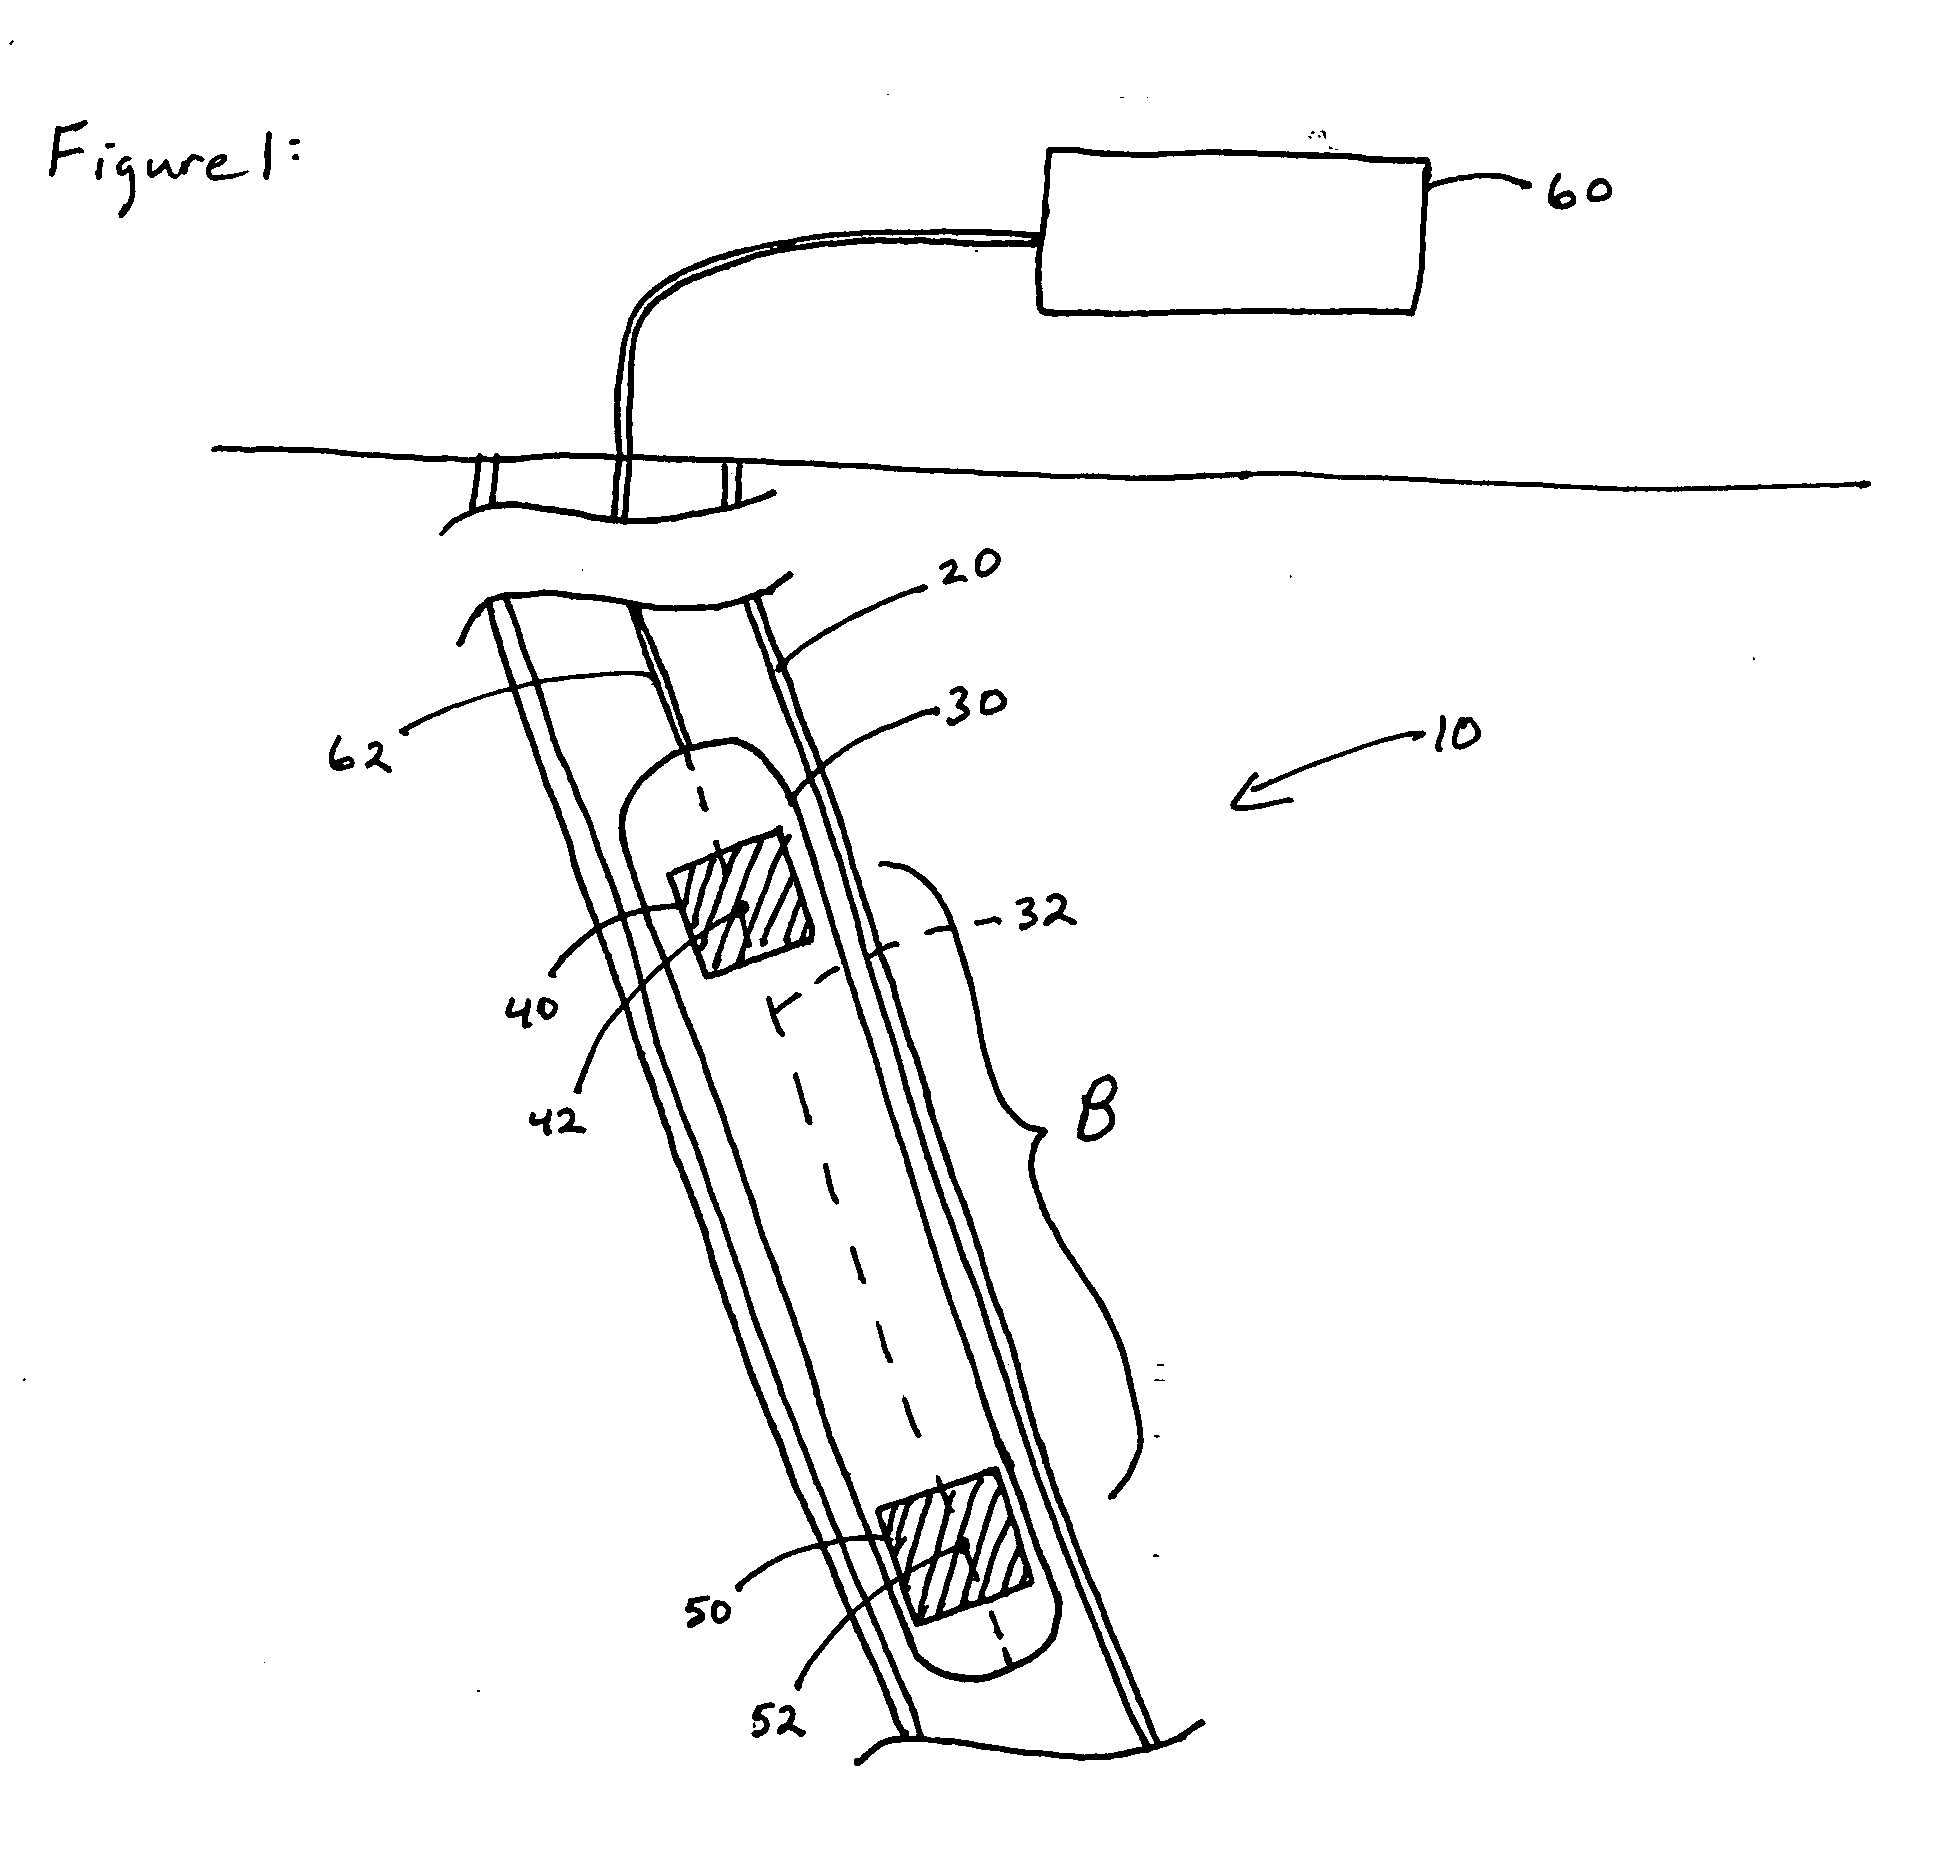 System and method for measurements of depth and velocity of instrumentation within a wellbore